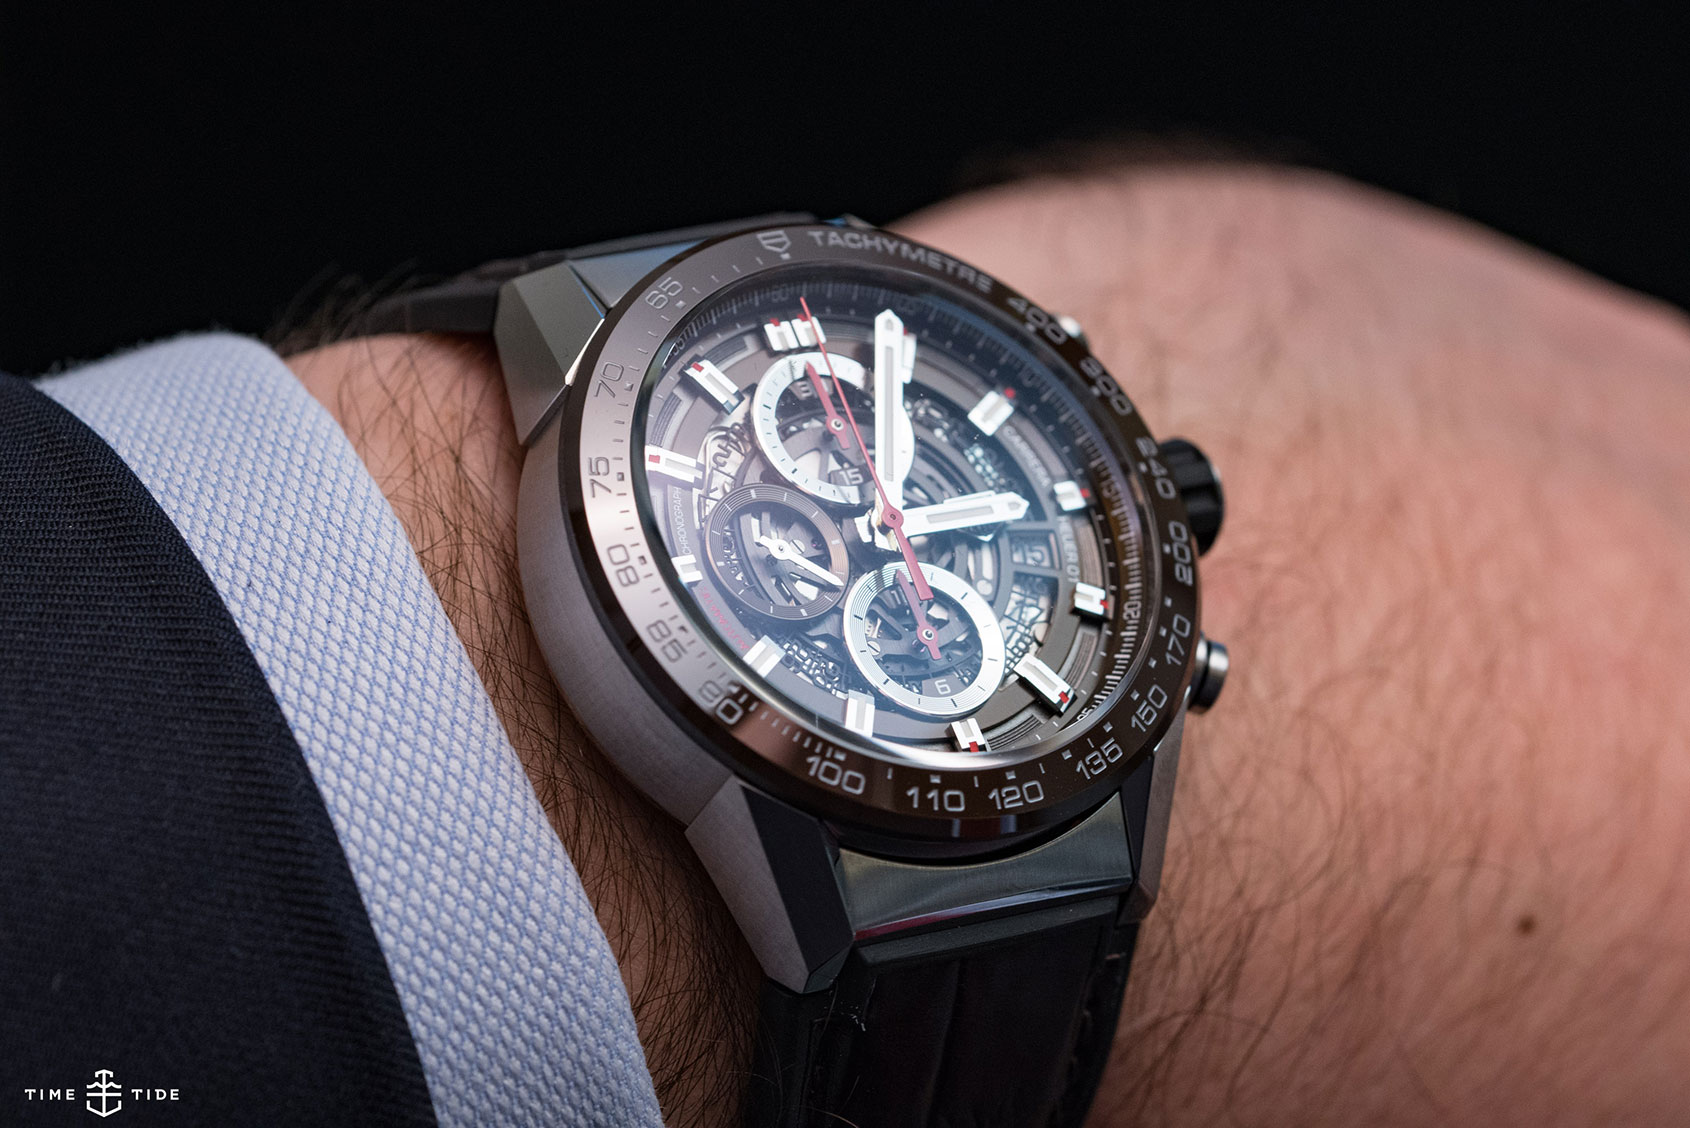 TAG Heuer Carrera Heuer 01 43mm – Hands-on Review